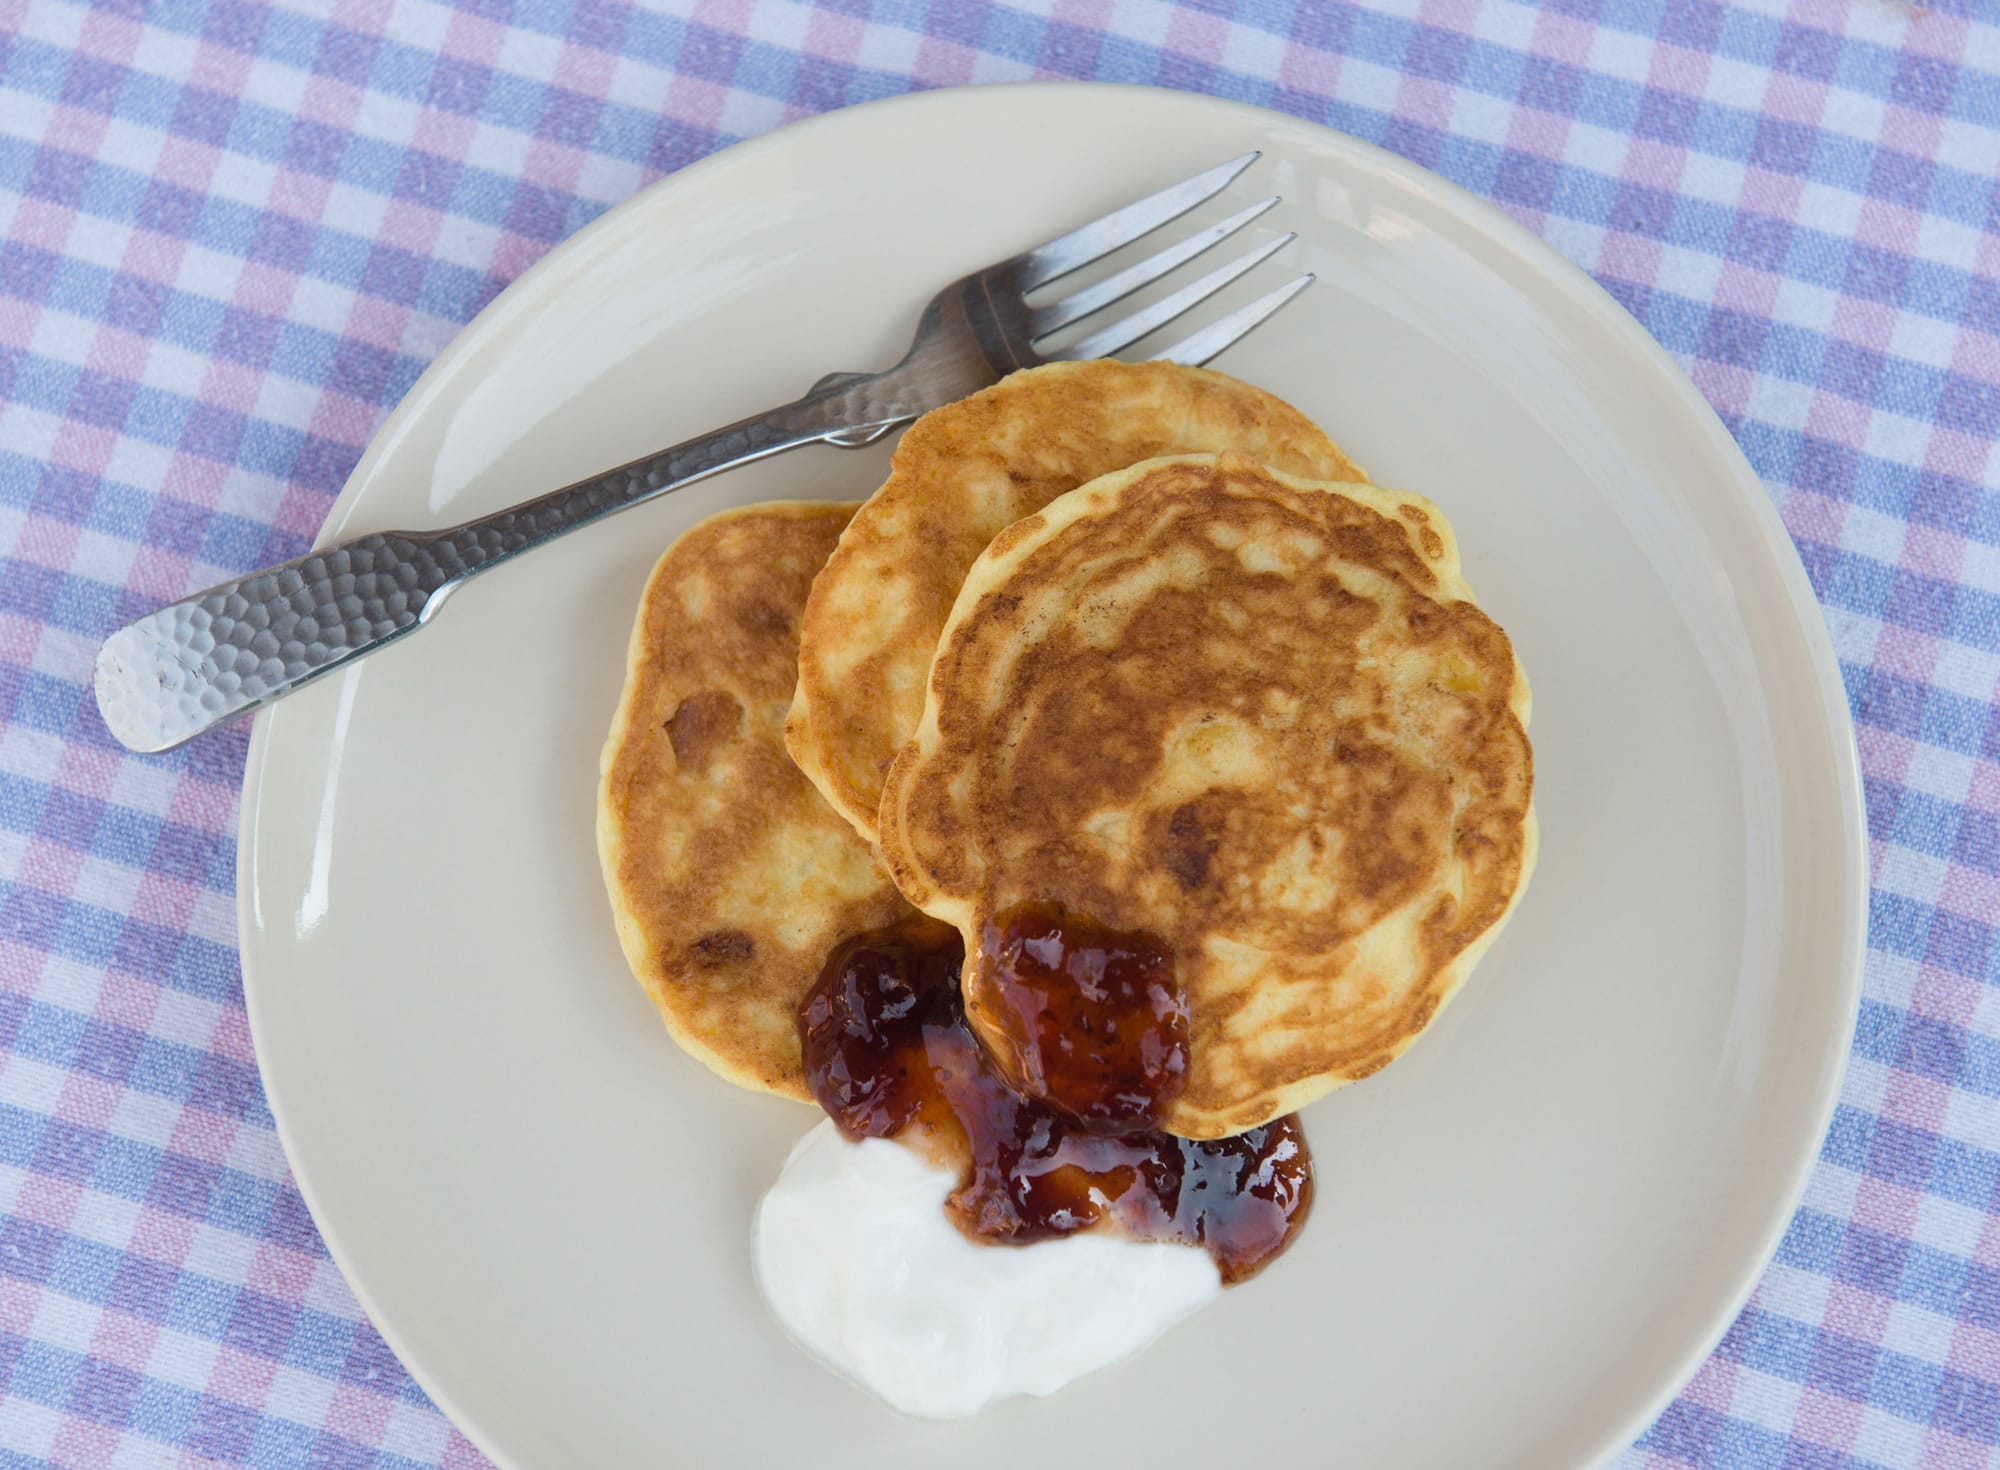 What handmade, creamy, large-curd cottage cheese can do for a simple pancake recipe is impressive.